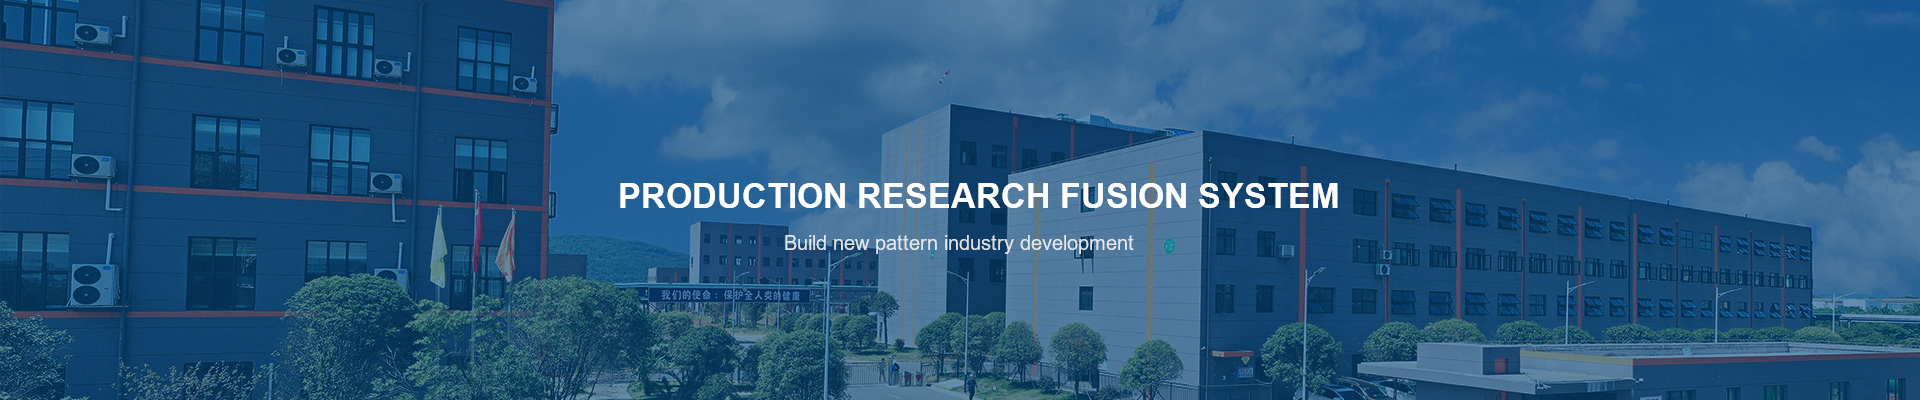 Leadsynbio Integrated production research system to build a new pattern of industry development